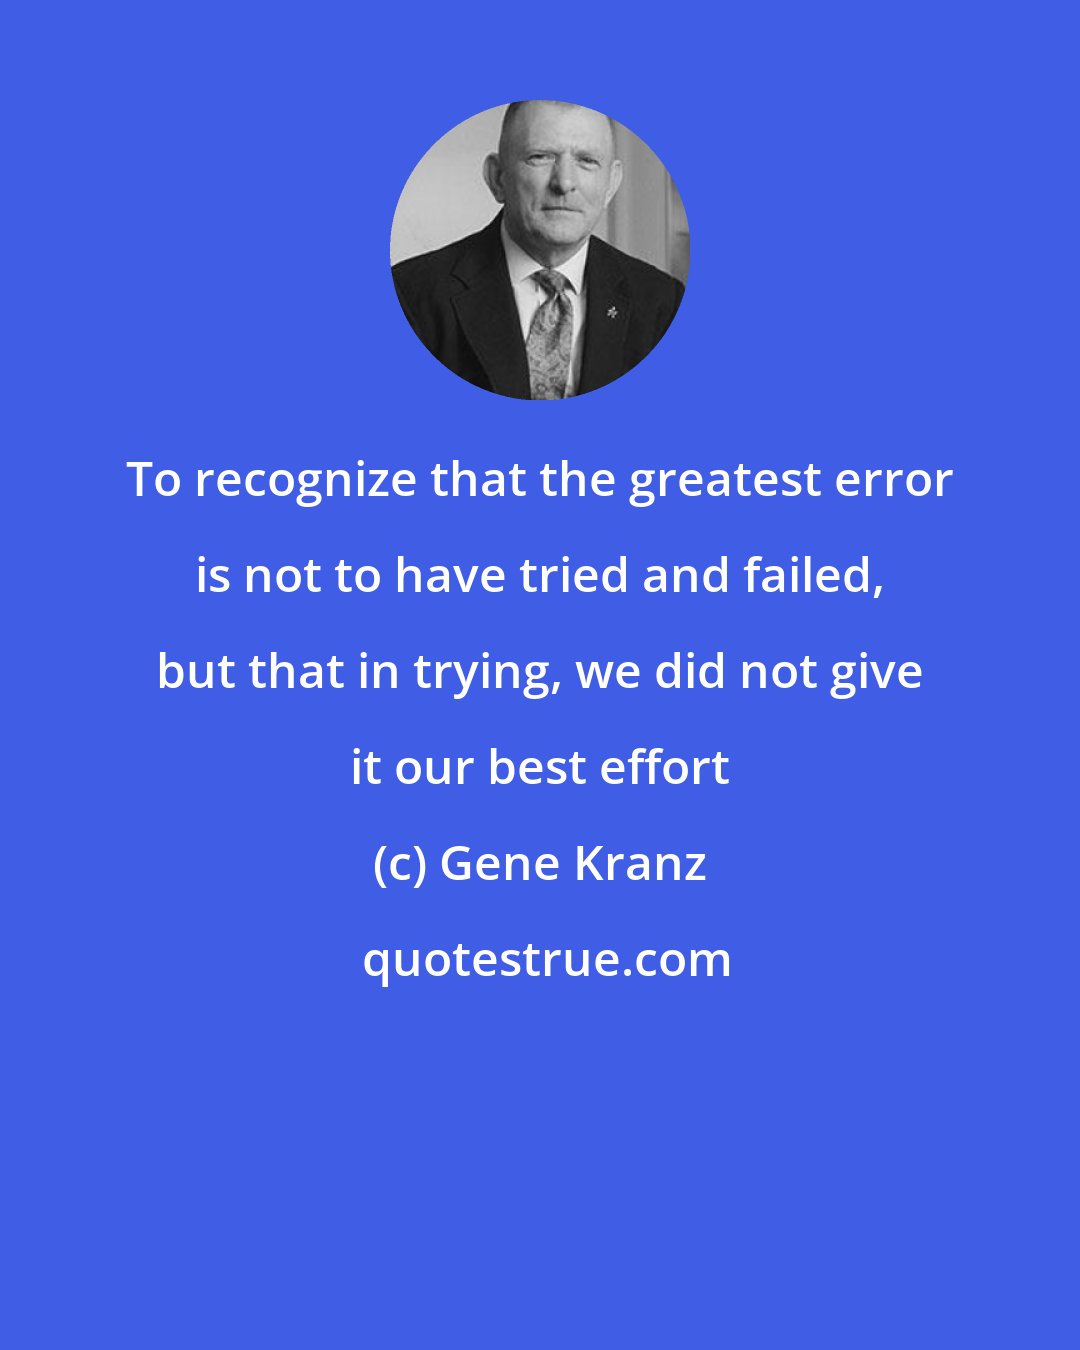 Gene Kranz: To recognize that the greatest error is not to have tried and failed, but that in trying, we did not give it our best effort